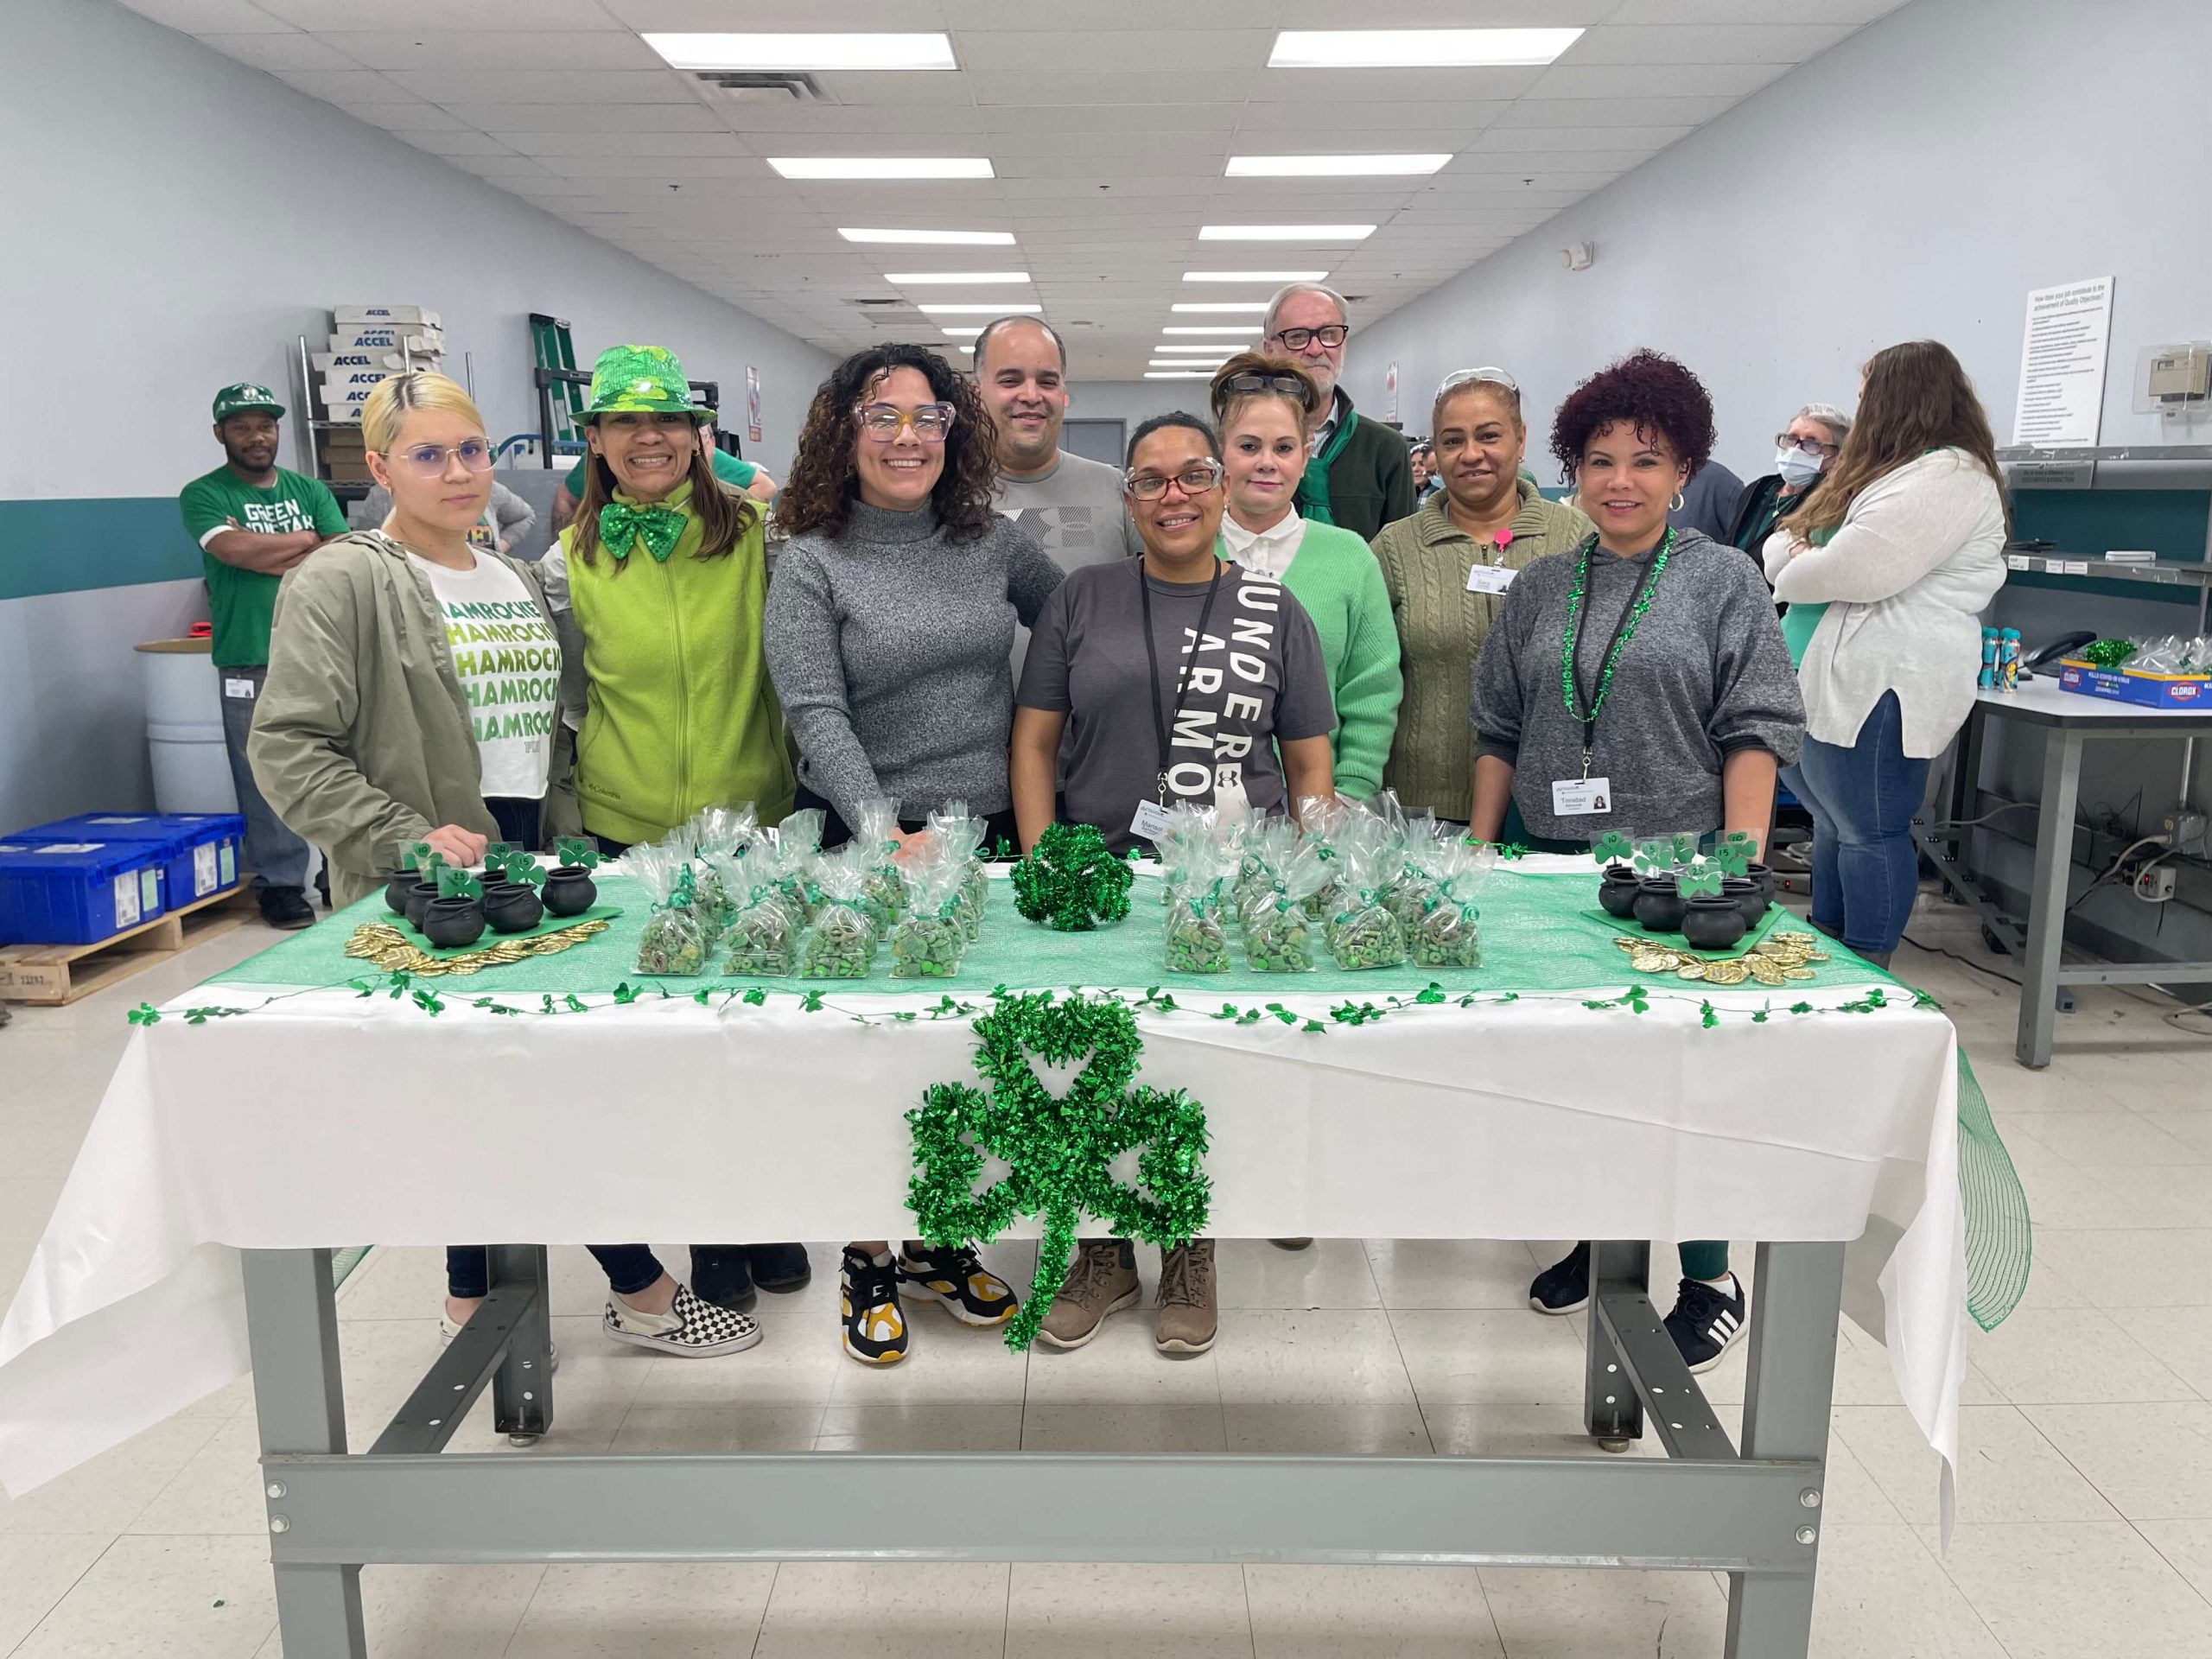 St. Patrick's Day celebration at Winchester Interconnect